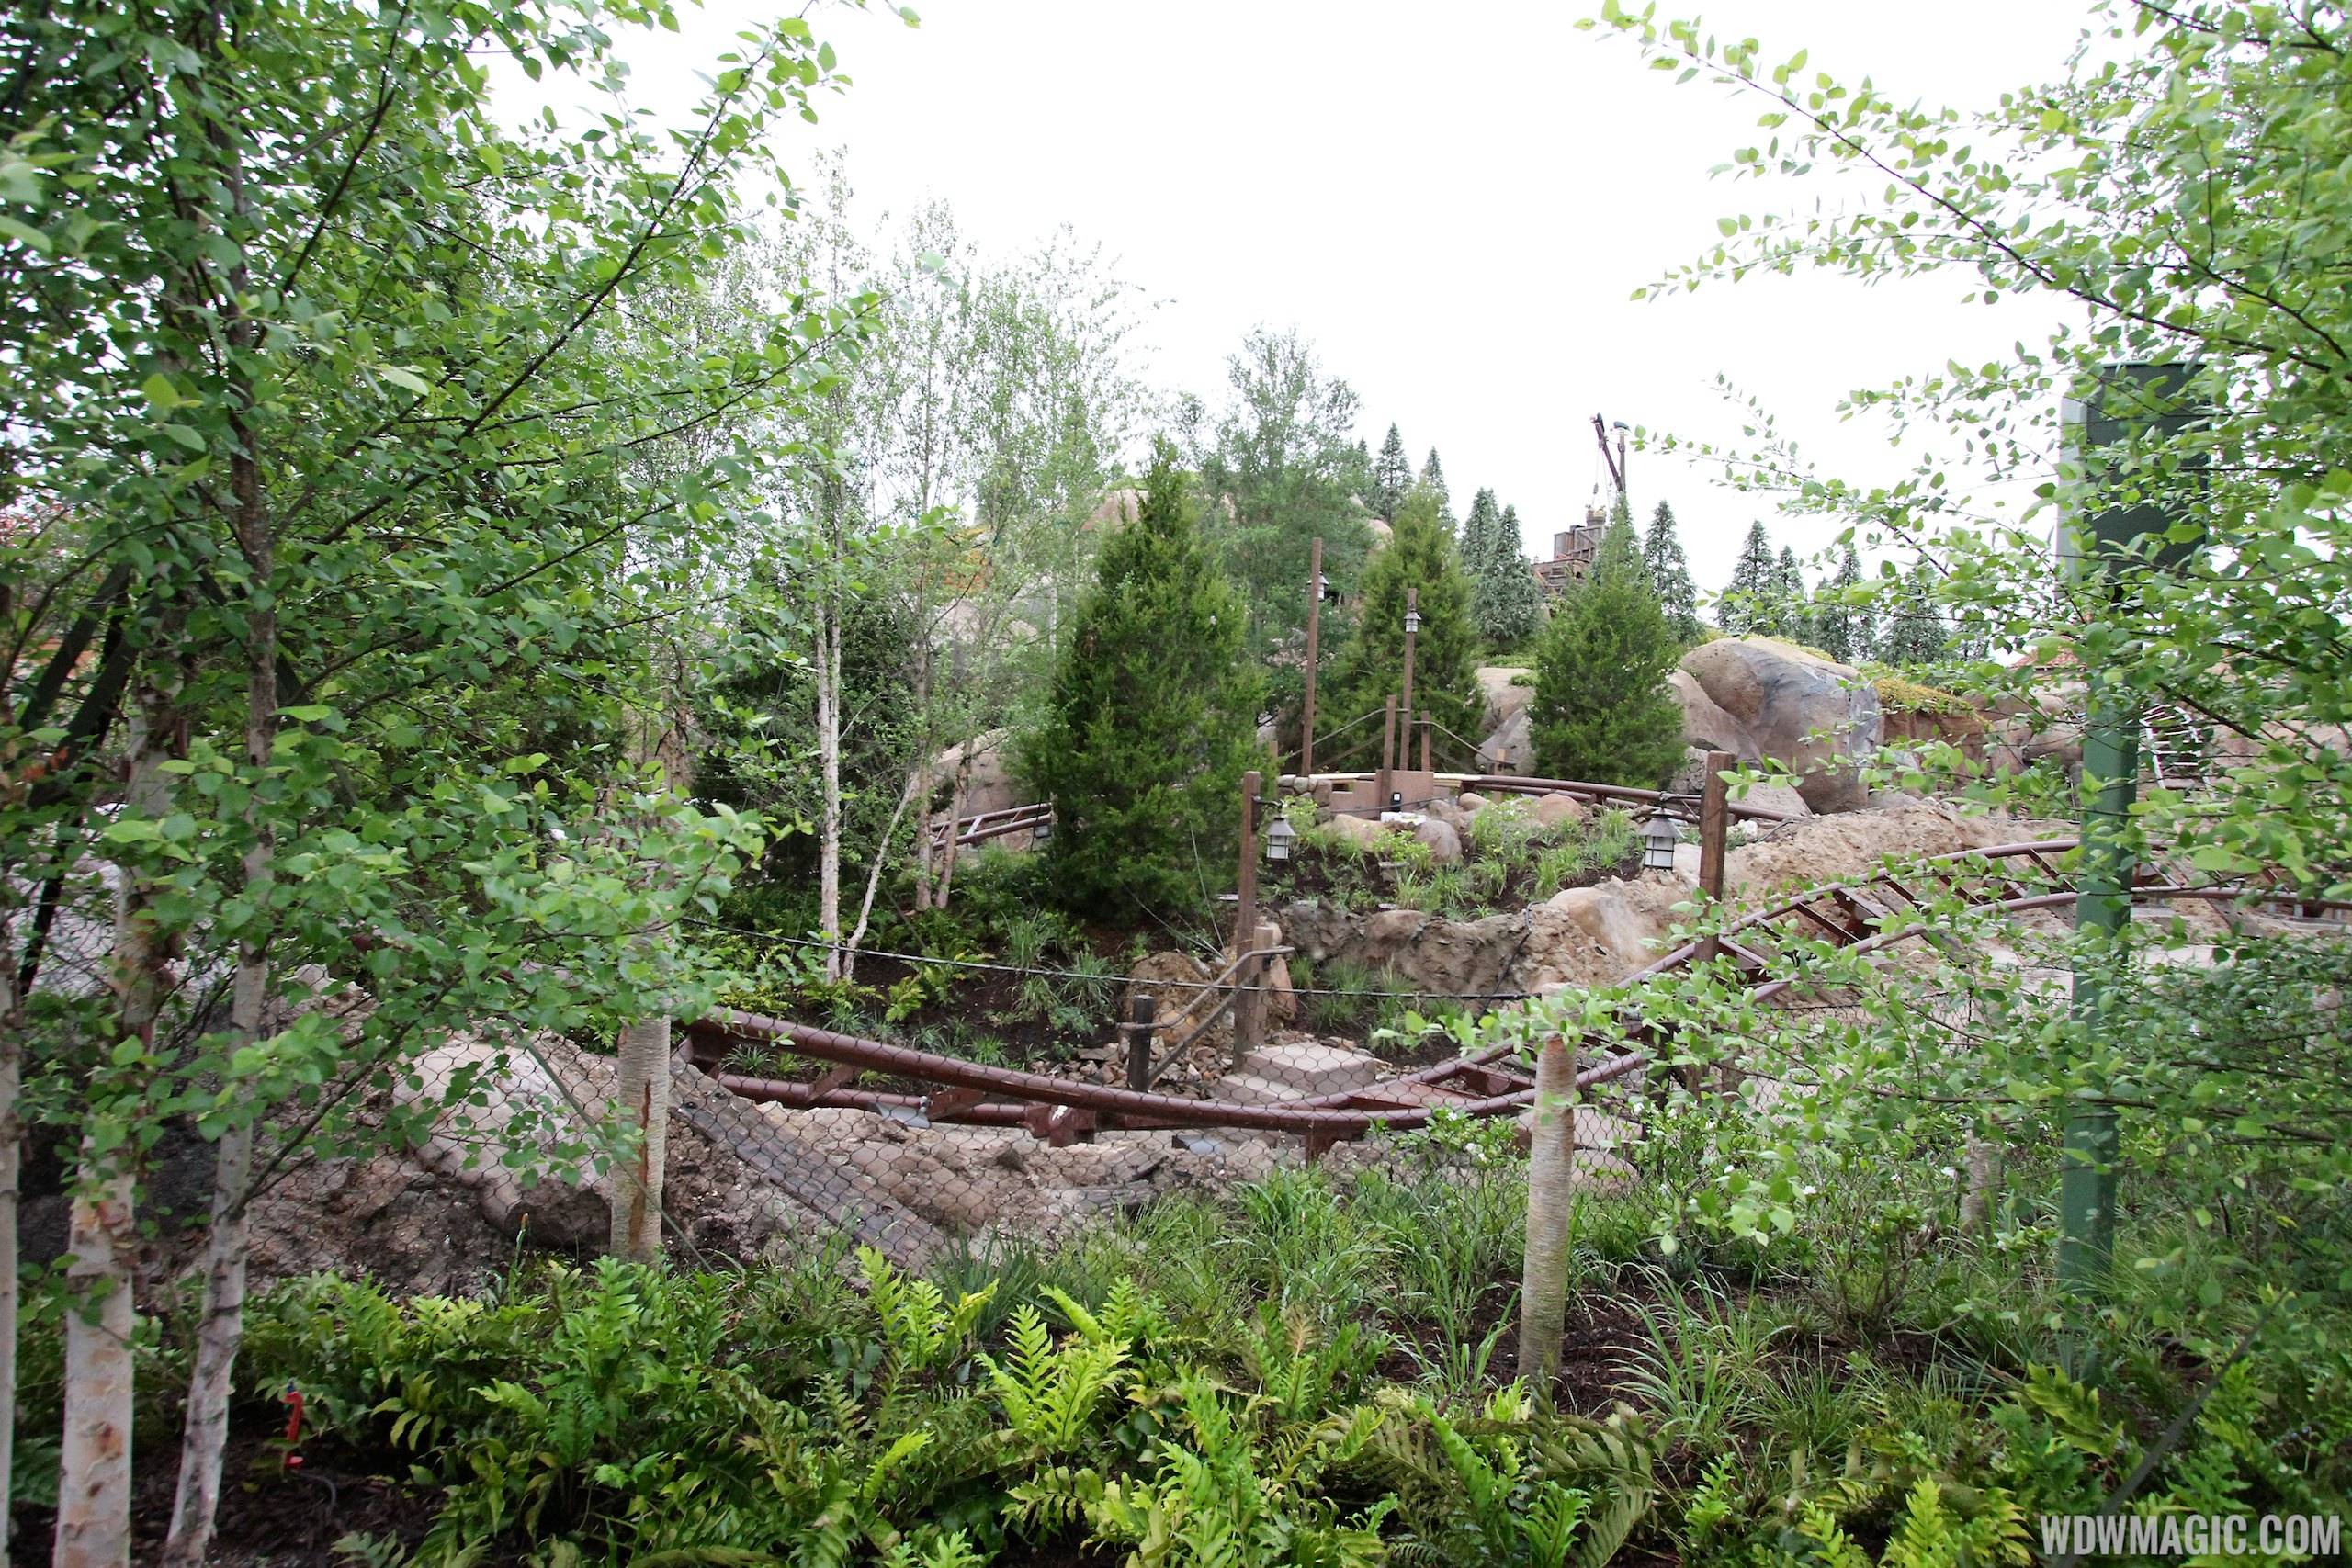 PHOTOS - More walls come down at the Seven Dwarfs Mine Train as opening edges closer